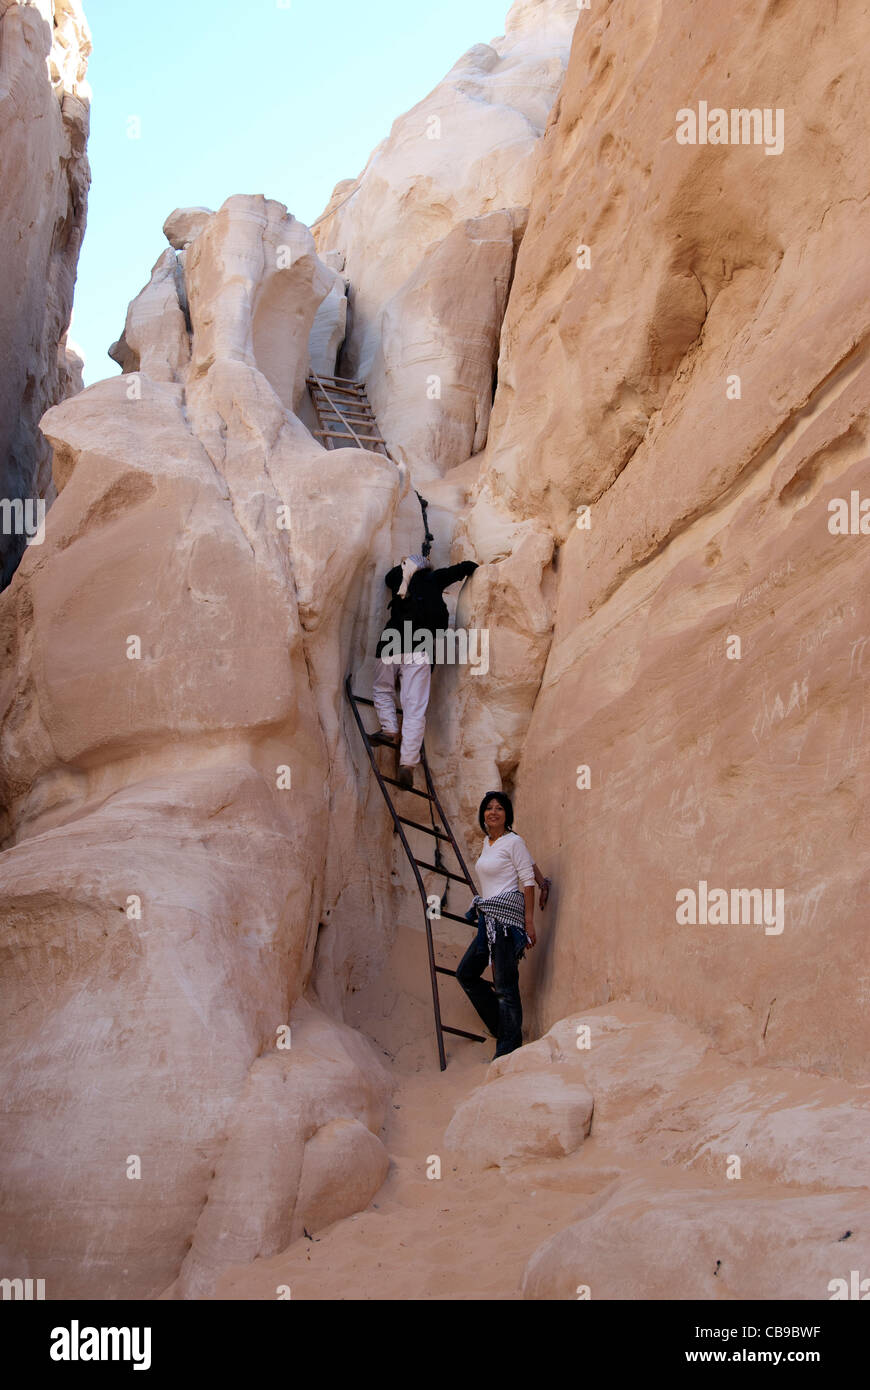 Bedouin guide with tourist climbing stairs in the white canyon - Sinai Peninsula, Egypt Stock Photo